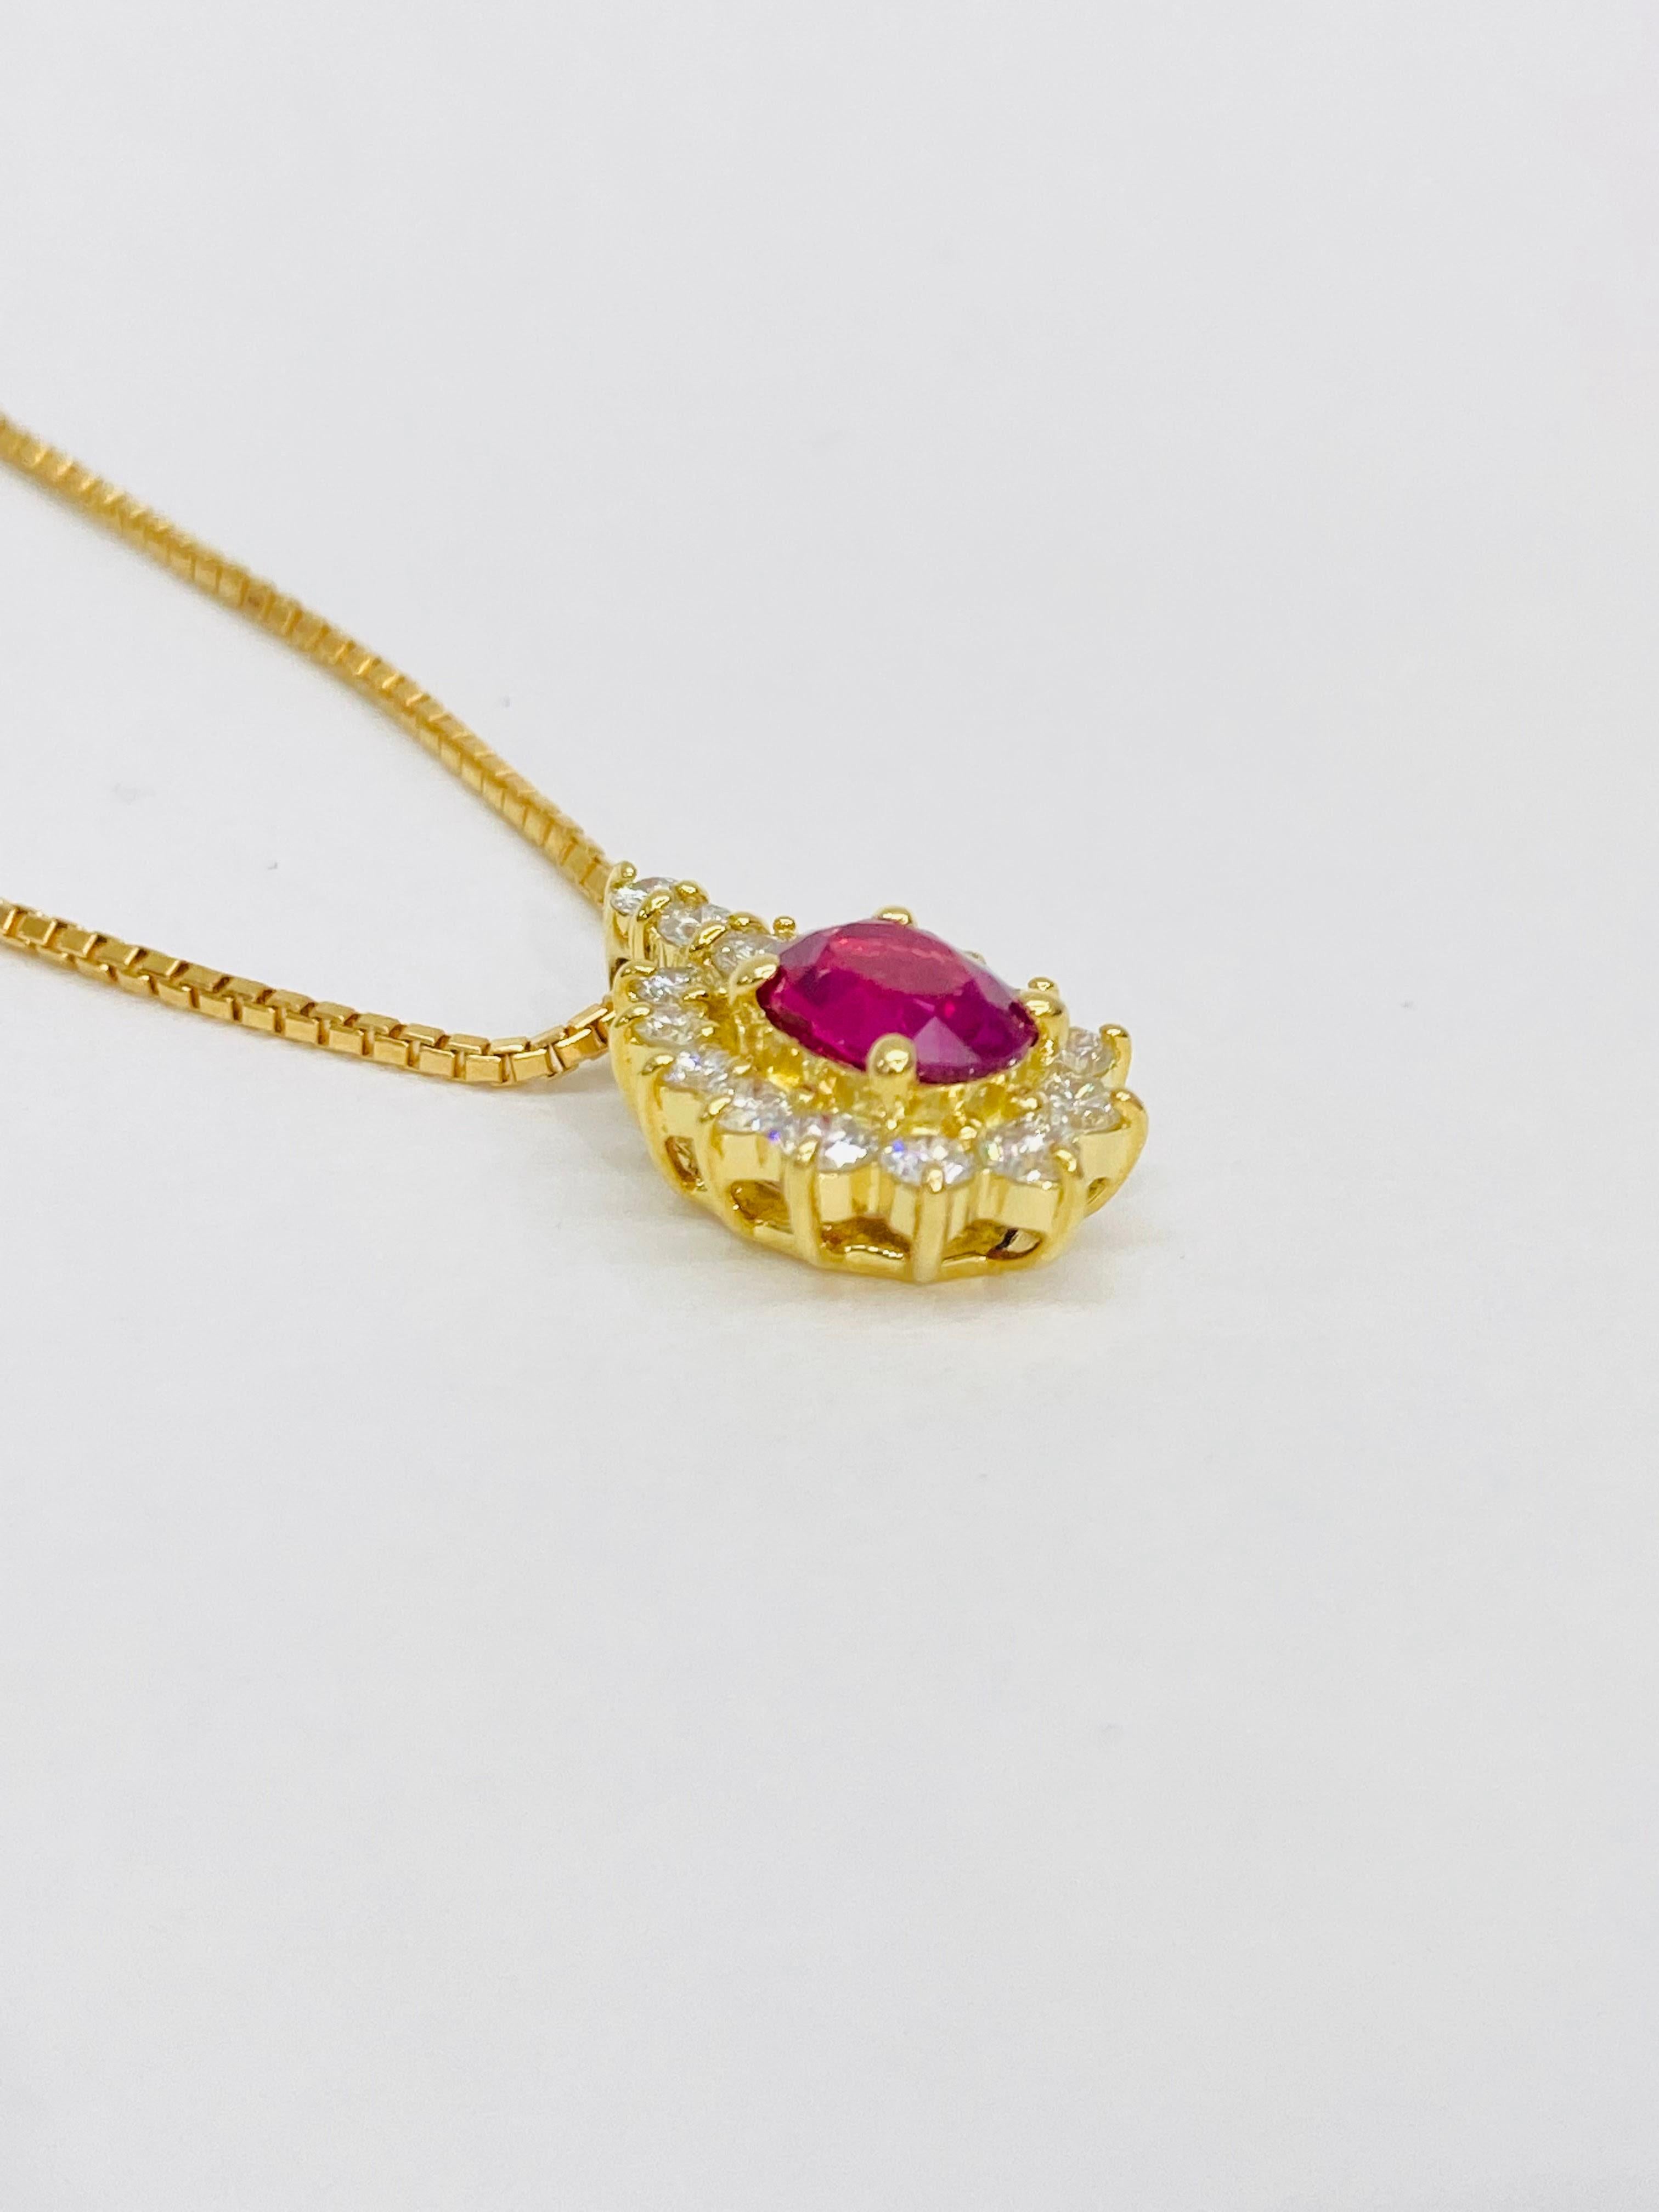 Bochic “Retro Vintage” Ruby & Diamond Cluster Neck Set In 18K Gold 

Natural Red Ruby Pear Shape 0.85 Carat 
Diamonds 0.45 Carat 
F color 
VS clarity 
18K Yellow Gold
5.10 Gram

This Necklace is from the 